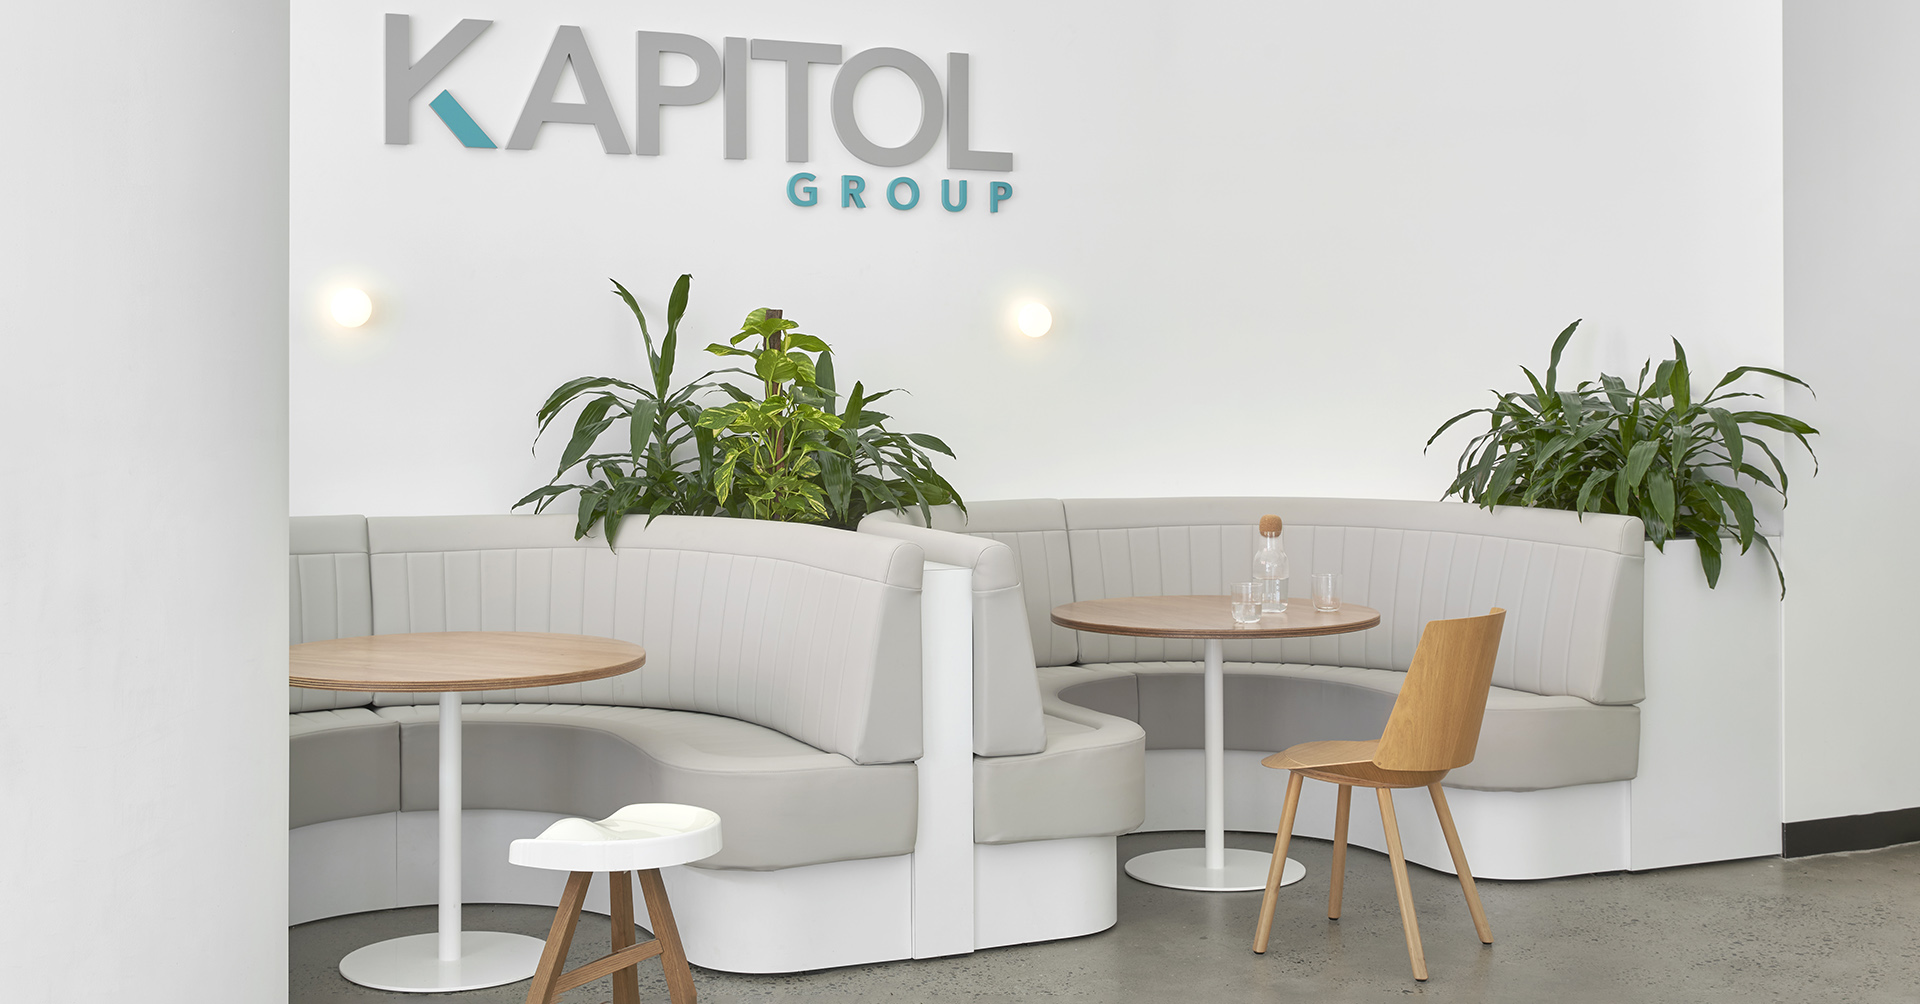 Kapitol Group Offices